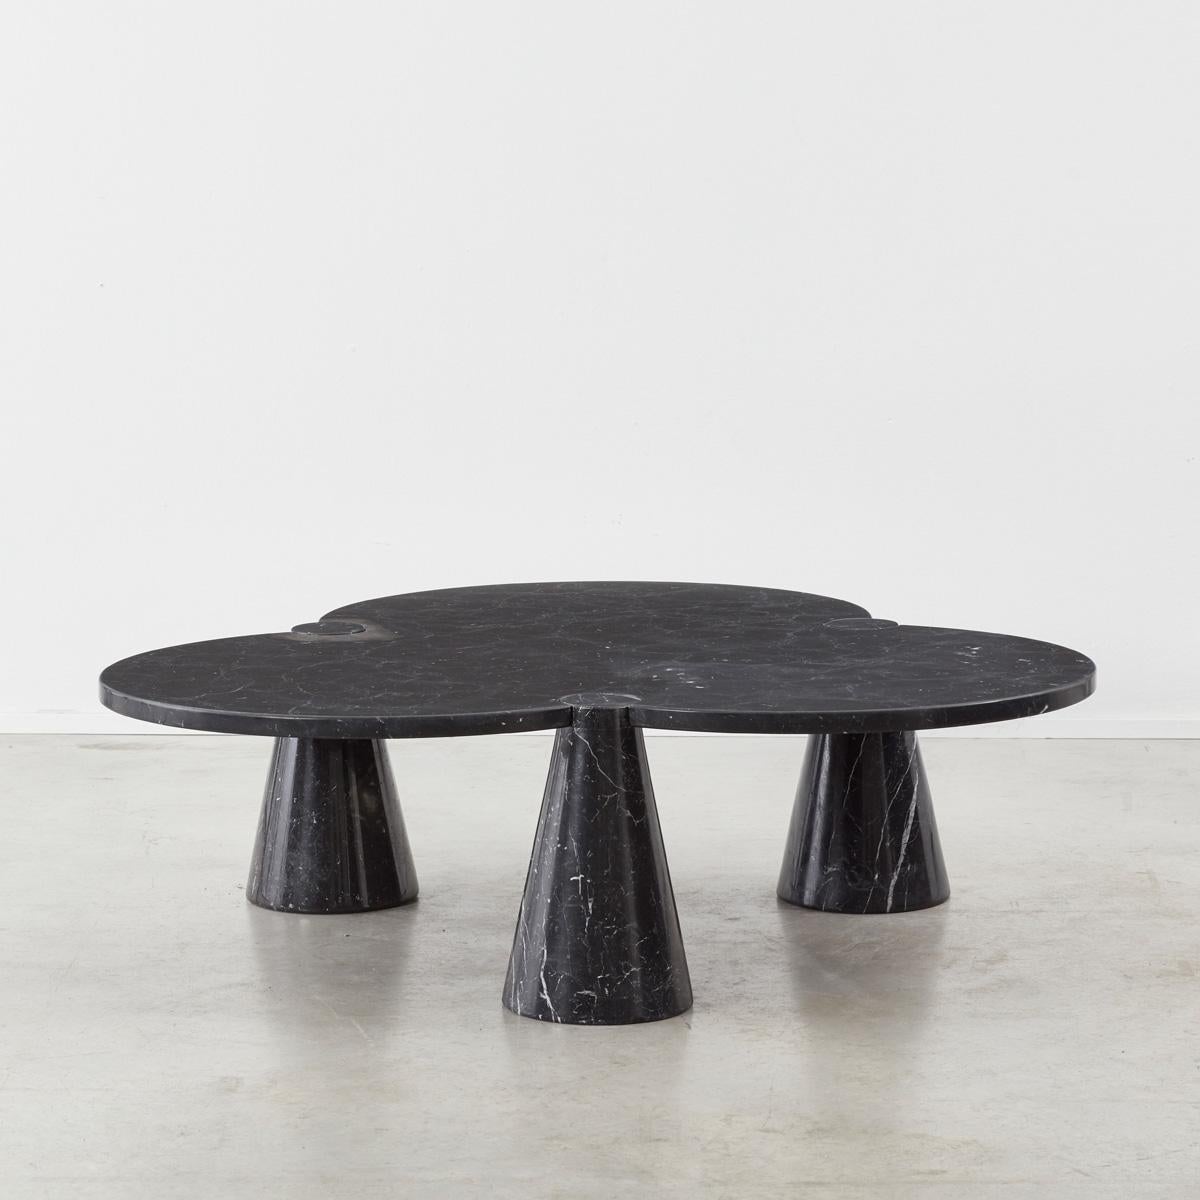 Angelo Mangiarotti’s (1921-2012) central philosophy as an architect was to create forms that responded directly to the material’s properties. The weight of marble inspired him to create the Trifoglio series of tables in the 1970s for Skipper.